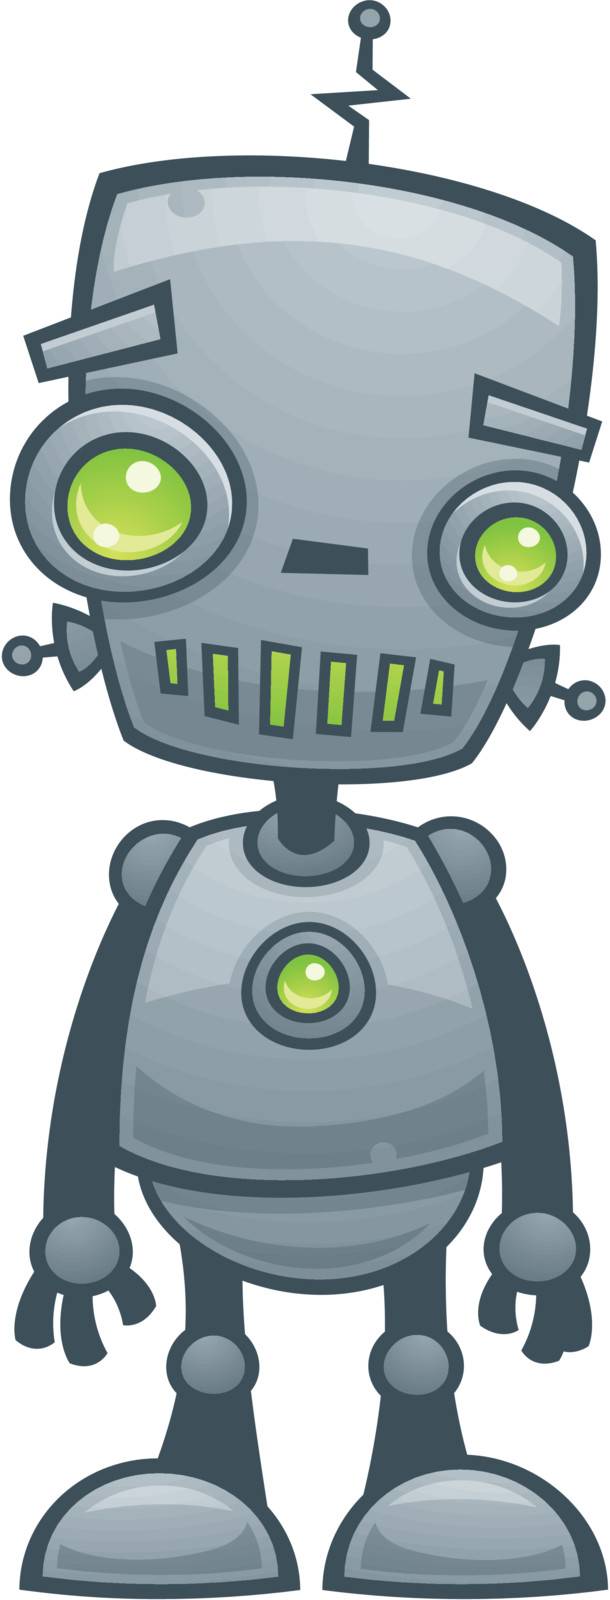 Cartoon vector illustration of a happy little robot with green eyes.